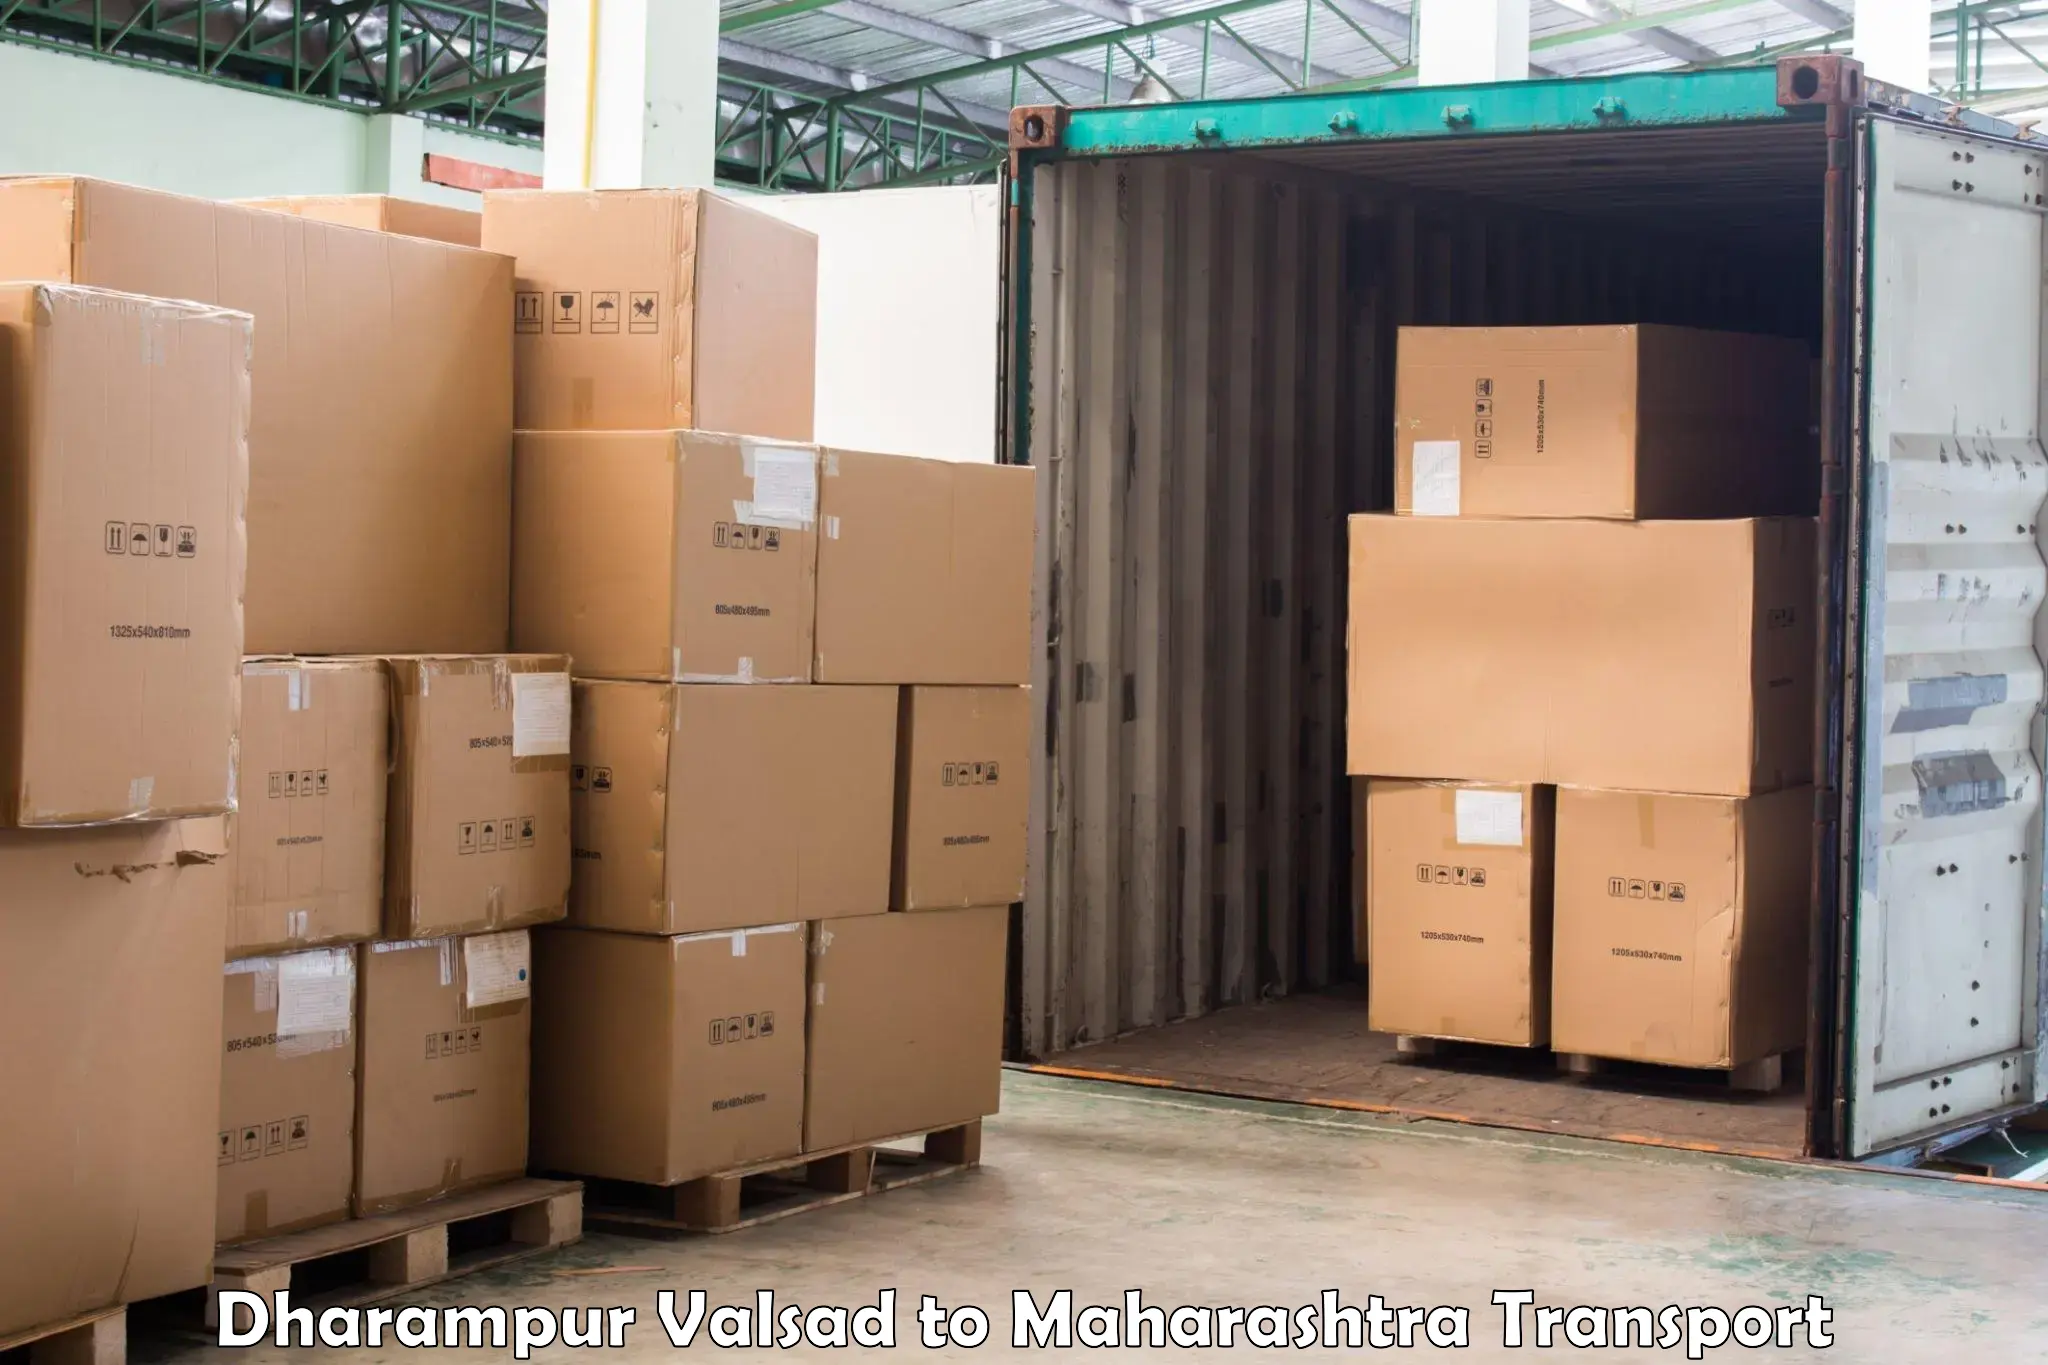 Cargo transportation services Dharampur Valsad to Hinganghat